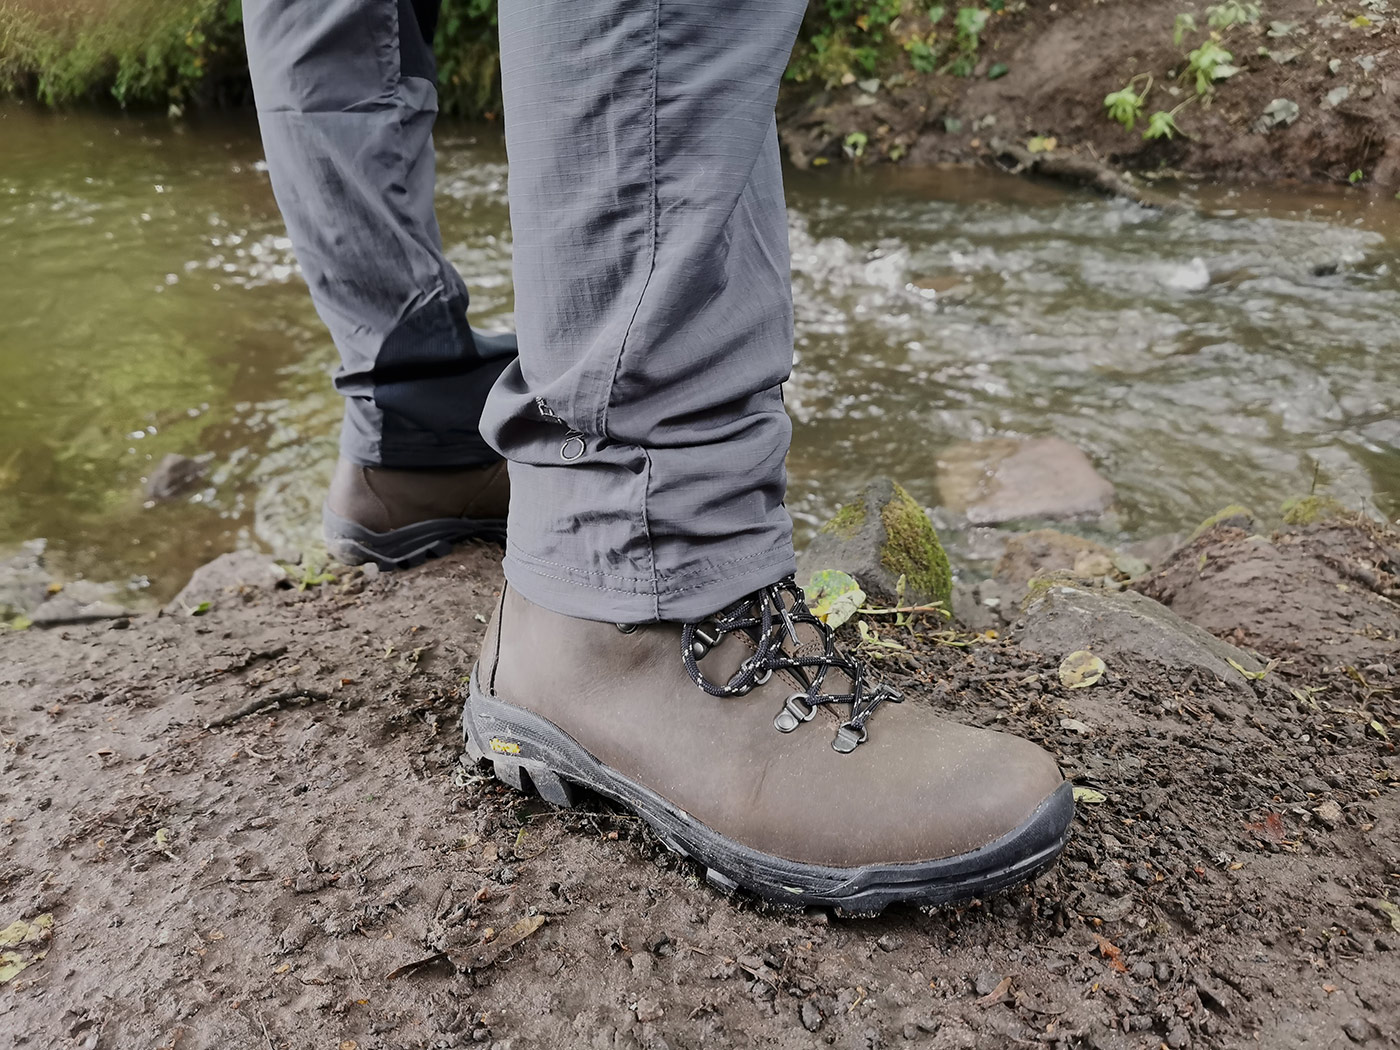 WALKING GEAR | We Fall For The Anatom Q2 Classic Hiking Boots From ...